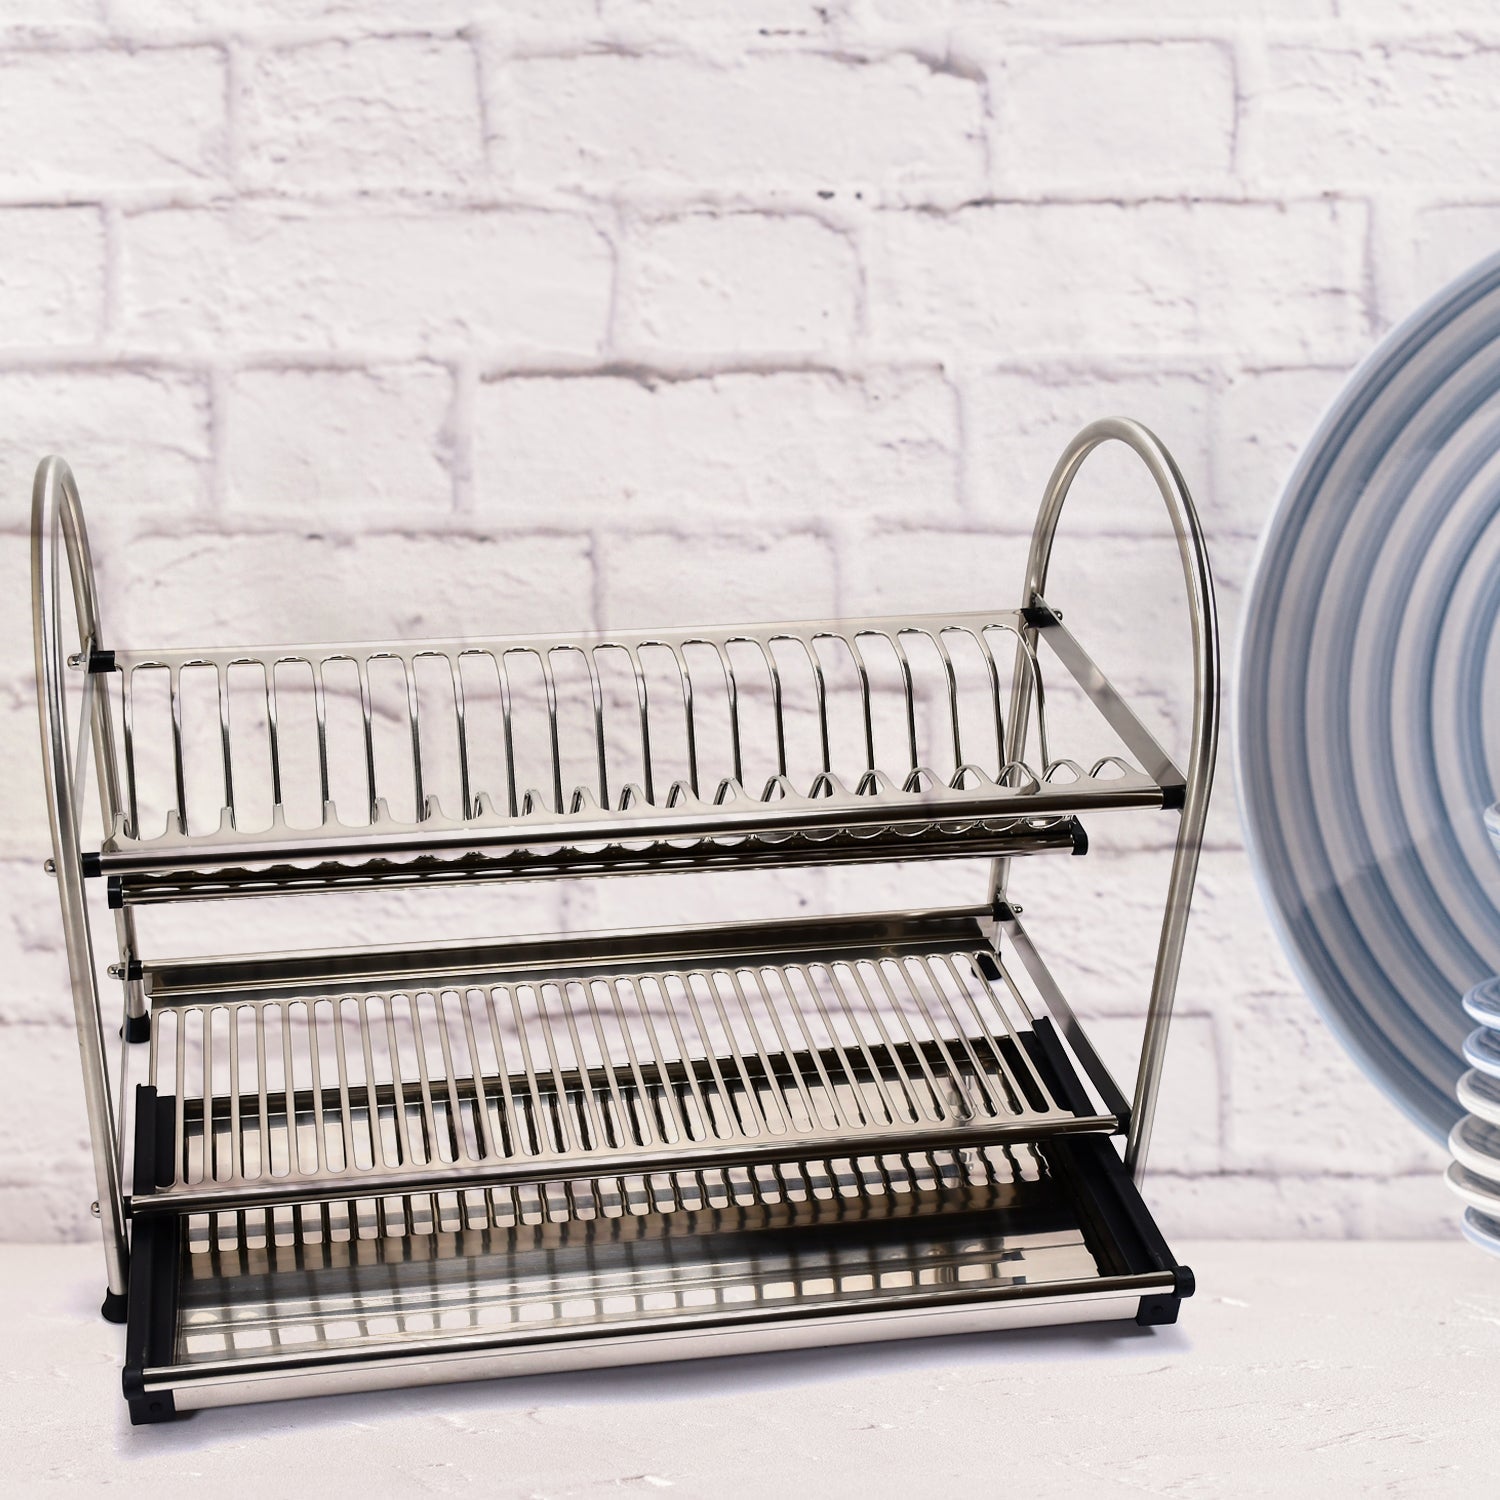 7672 Dish Rack Stainless Steel Rack 2layer Rack For Home & Kitchen Use DeoDap